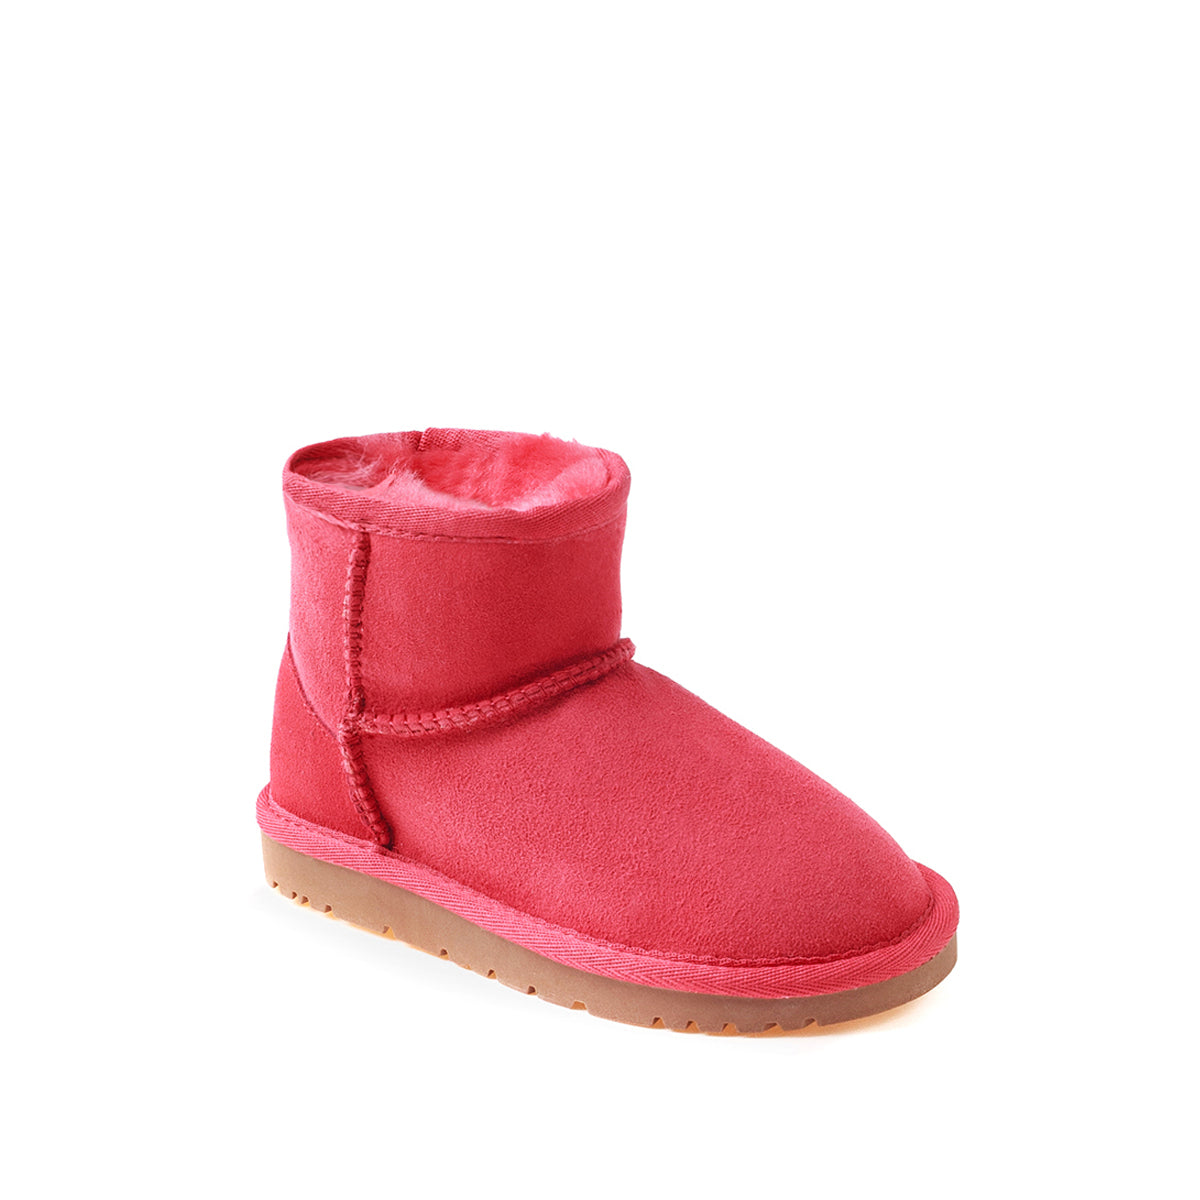 Ugg Kids Mini Boots (Water Resistant)-Kid Boots-PEROZ Accessories